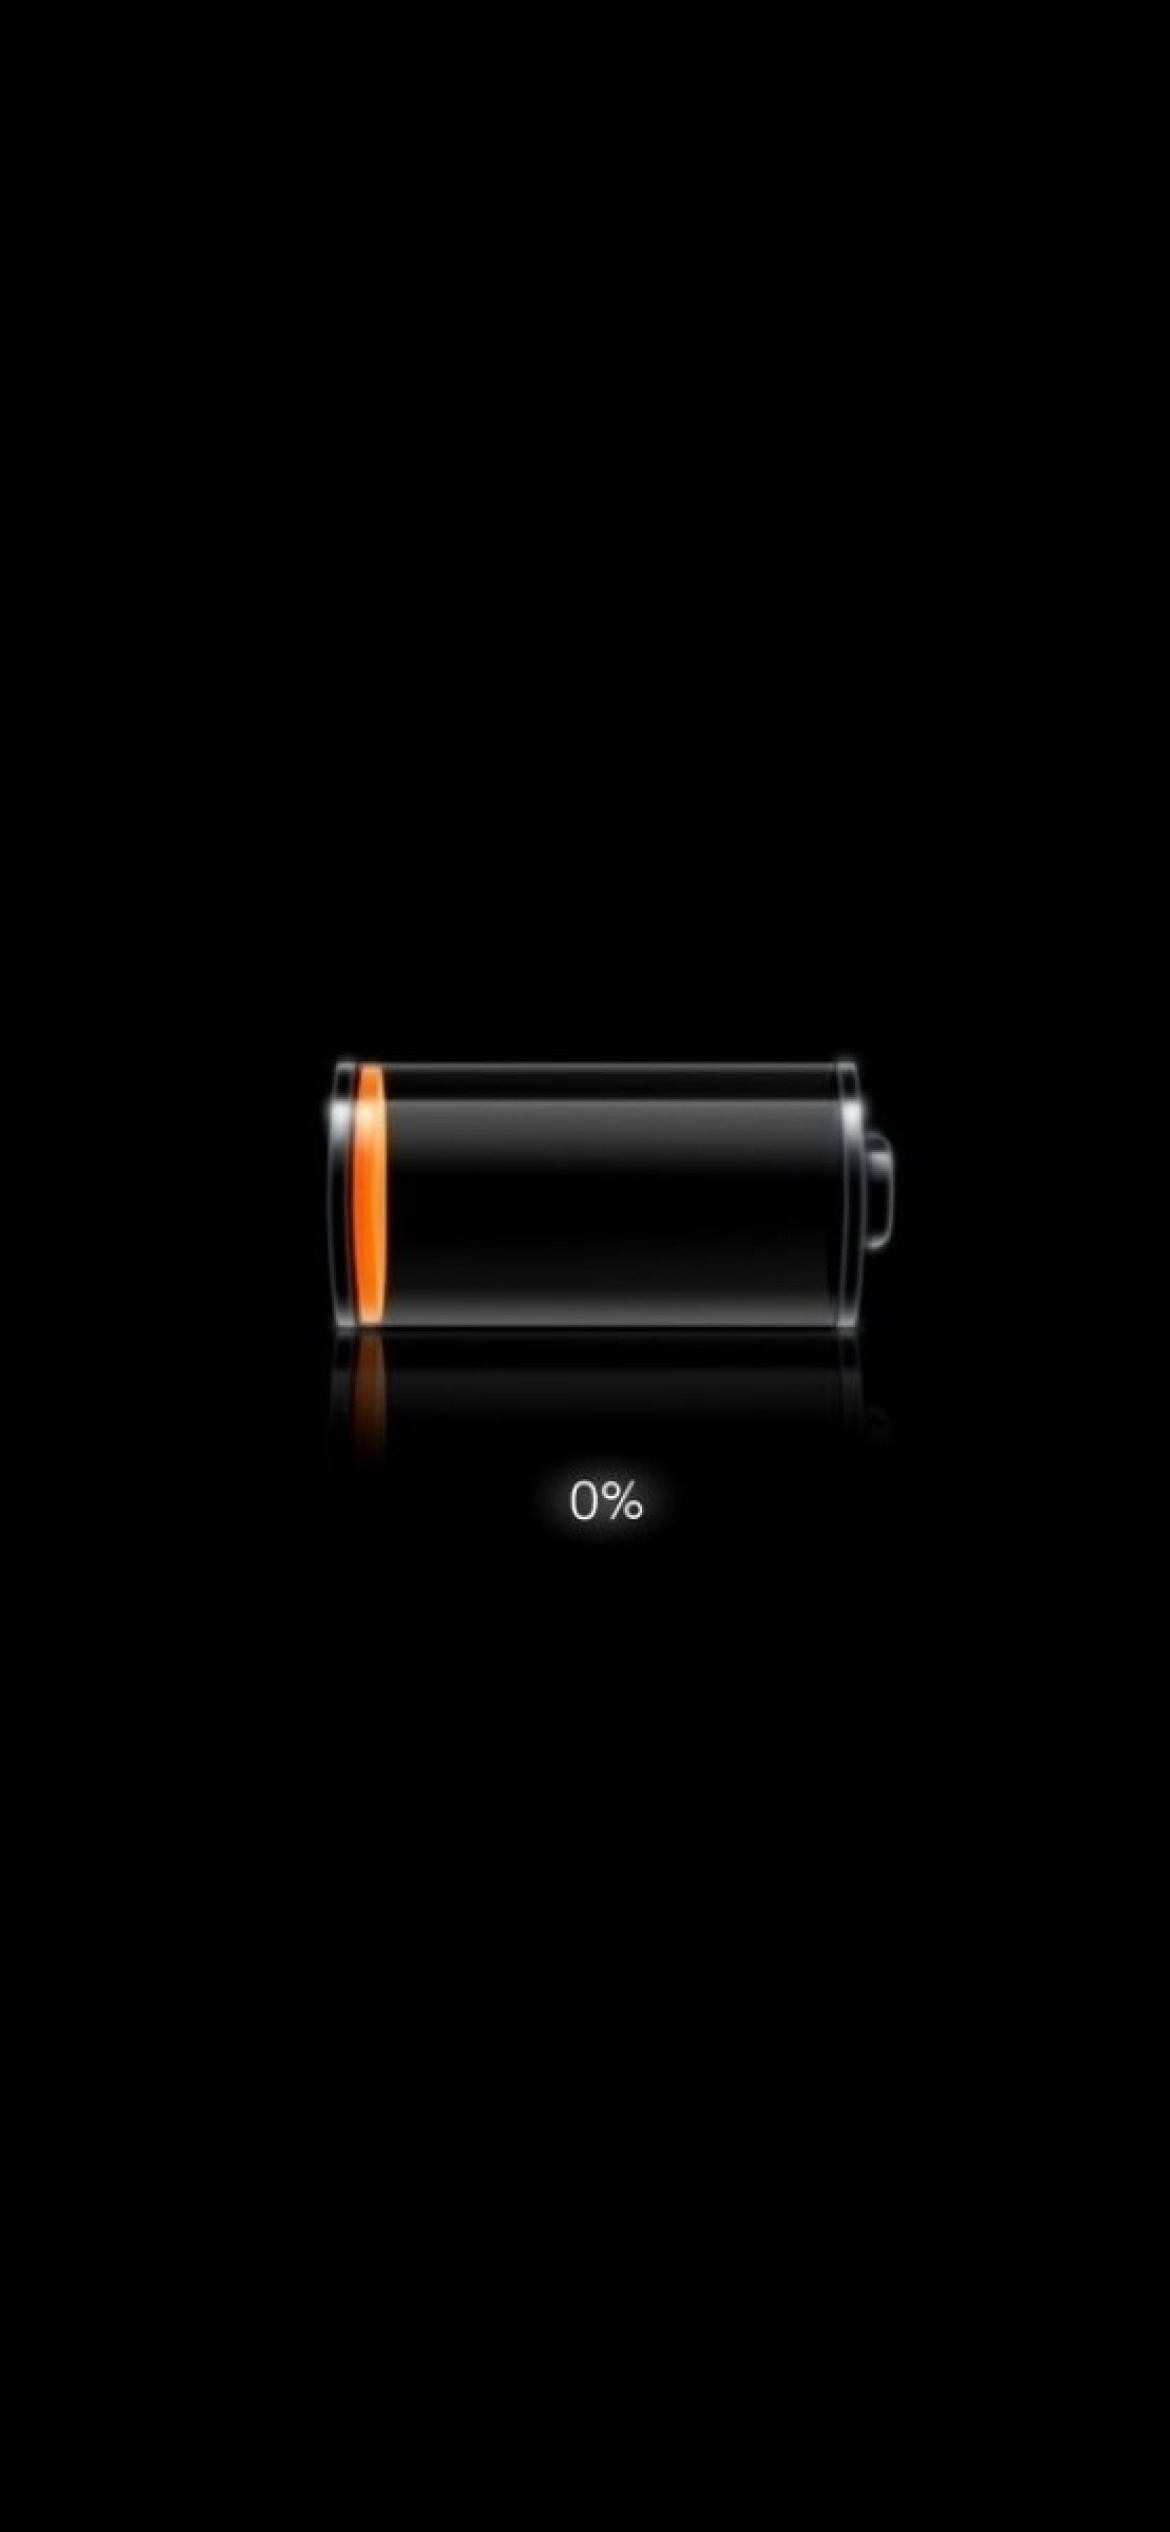 Battery Charge wallpaper 1170x2532